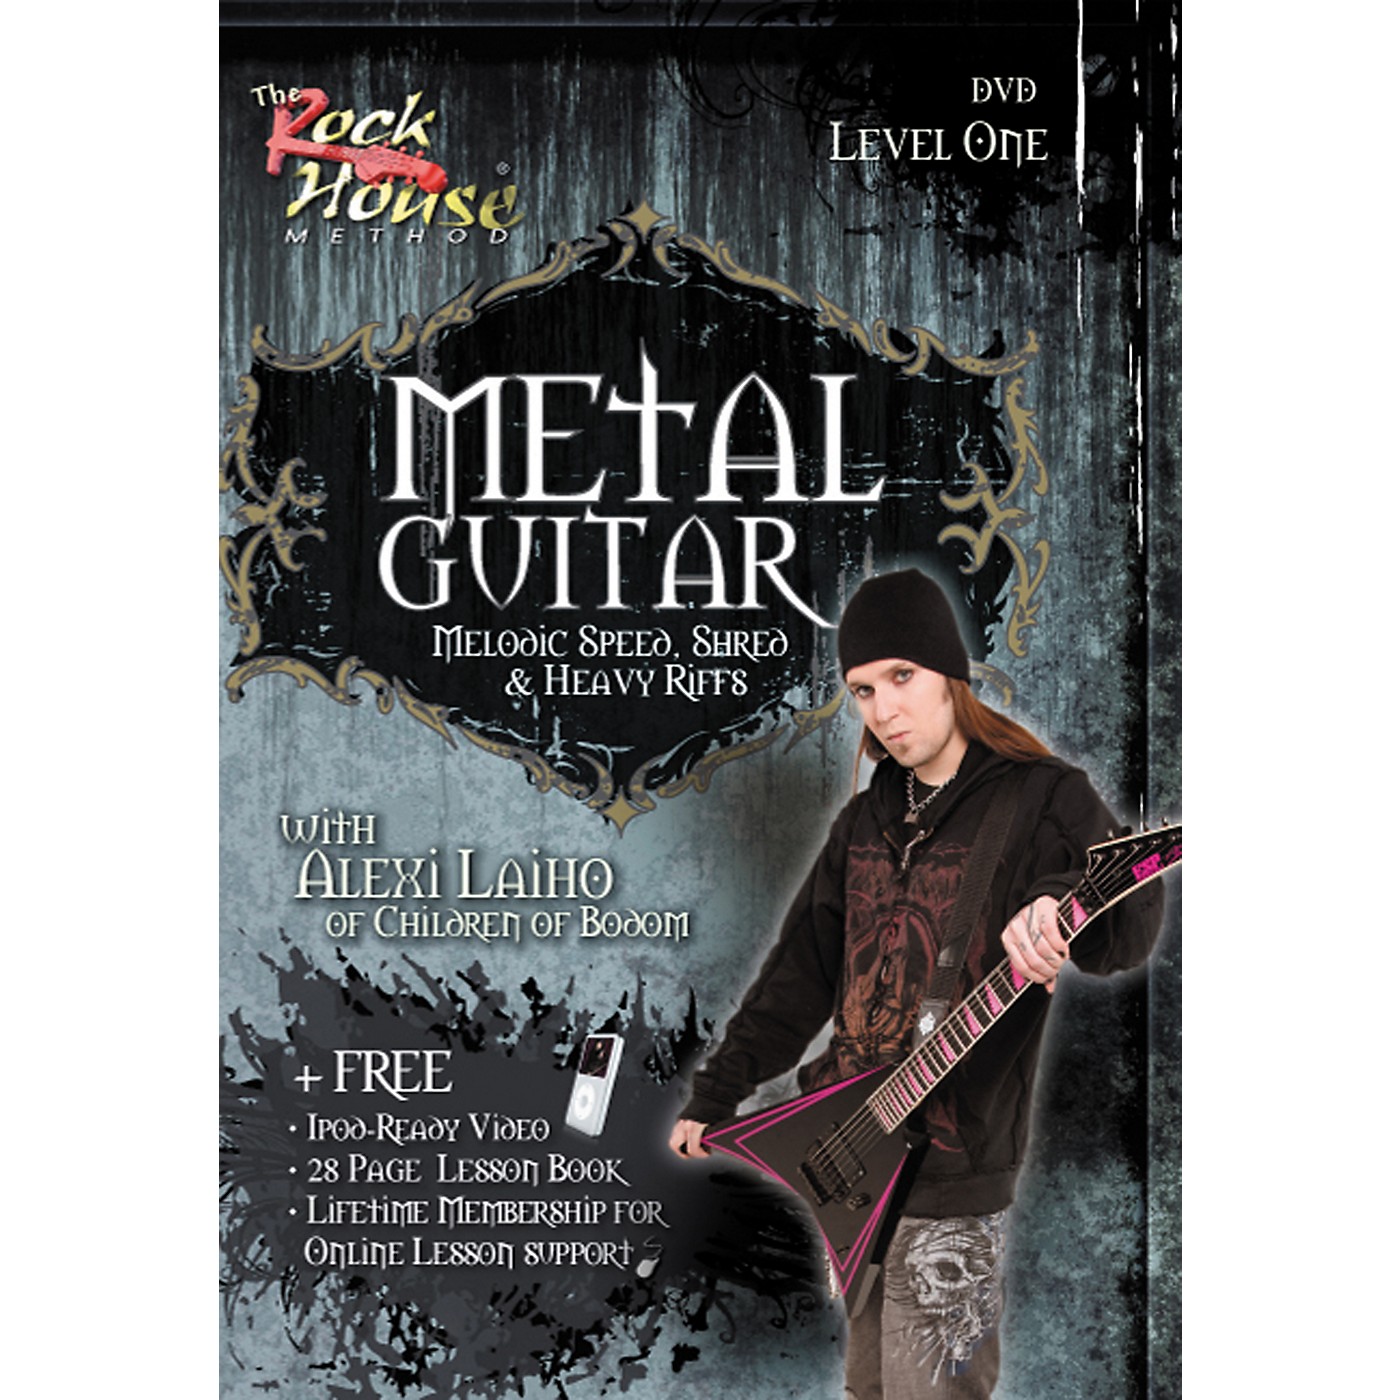 Rock House Metal Guitar, Melodic Speed, Shred & Heavy Riffs Level 1 with Alexi Laiho of Children of Bodom DVD thumbnail